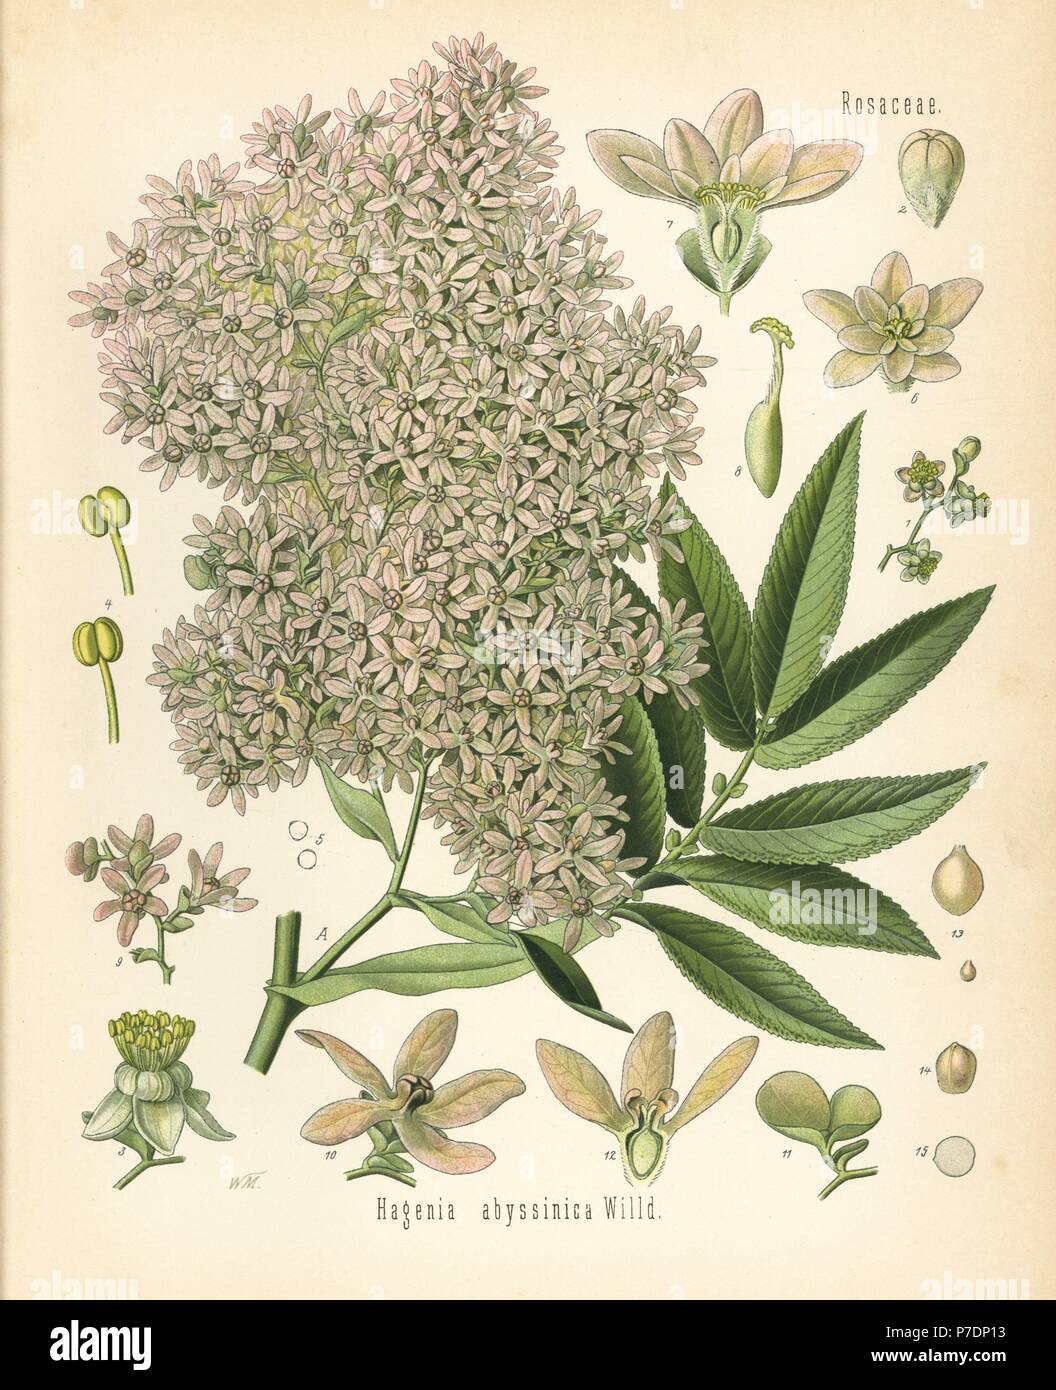 African redwood or kousso, Hagenia abyssinica. Chromolithograph after a botanical illustration by Walther Muller from Hermann Adolph Koehler's Medicinal Plants, edited by Gustav Pabst, Koehler, Germany, 1887. Stock Photo